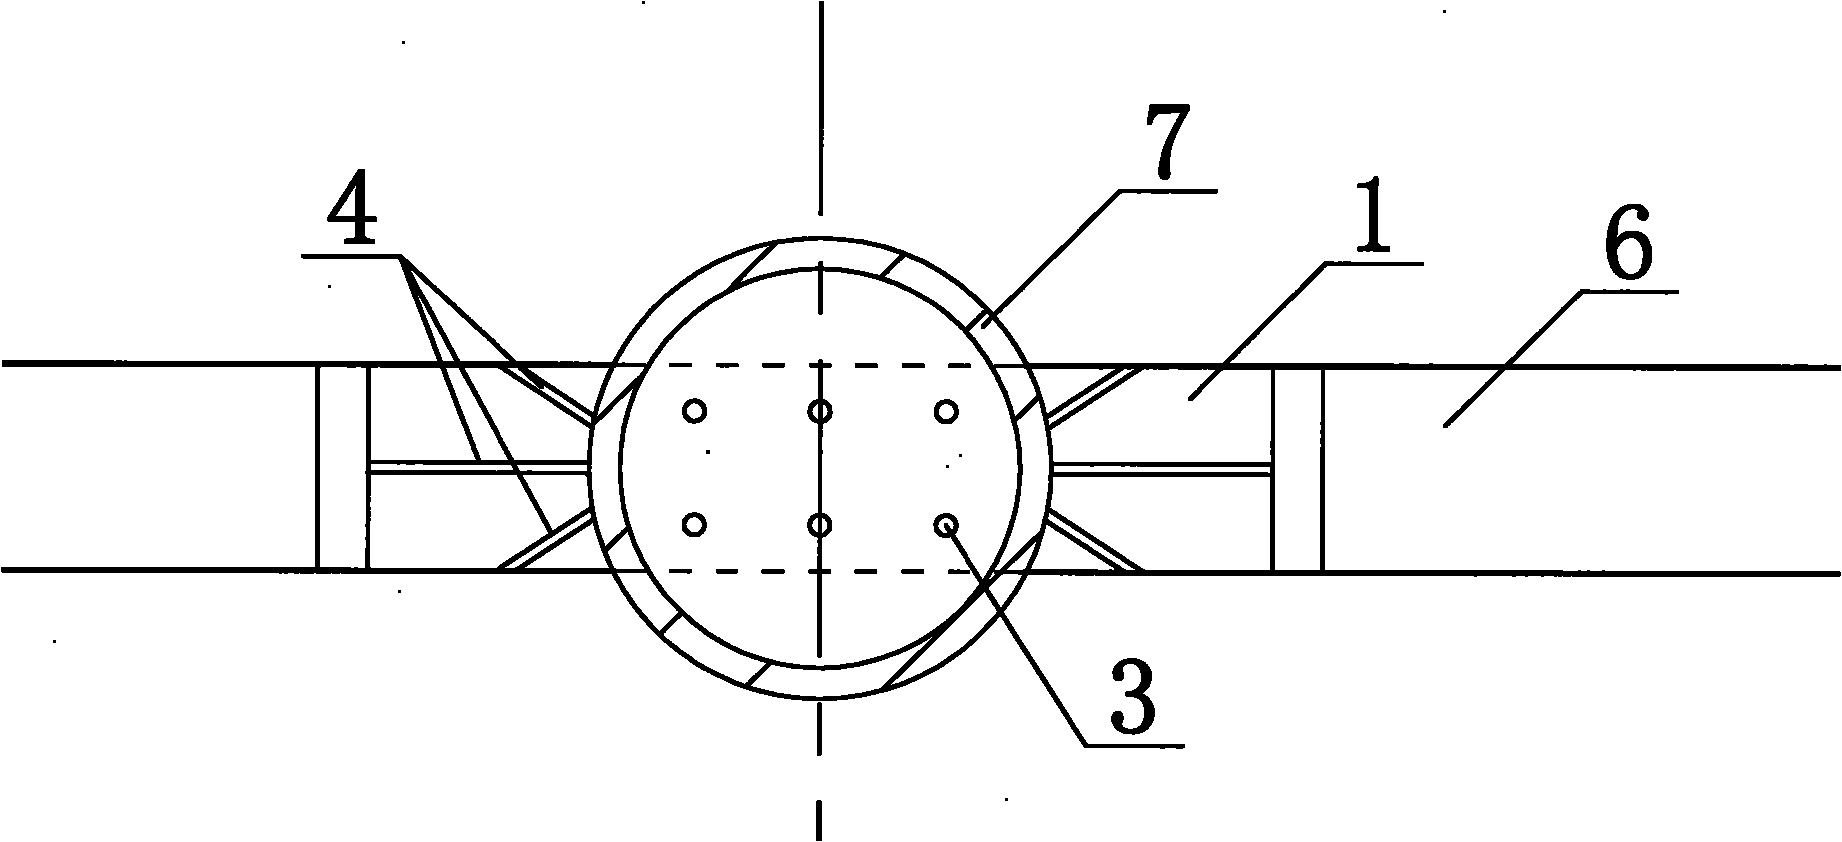 Connection structure for concrete-filled circular steel tubular pier column and concrete cover beam